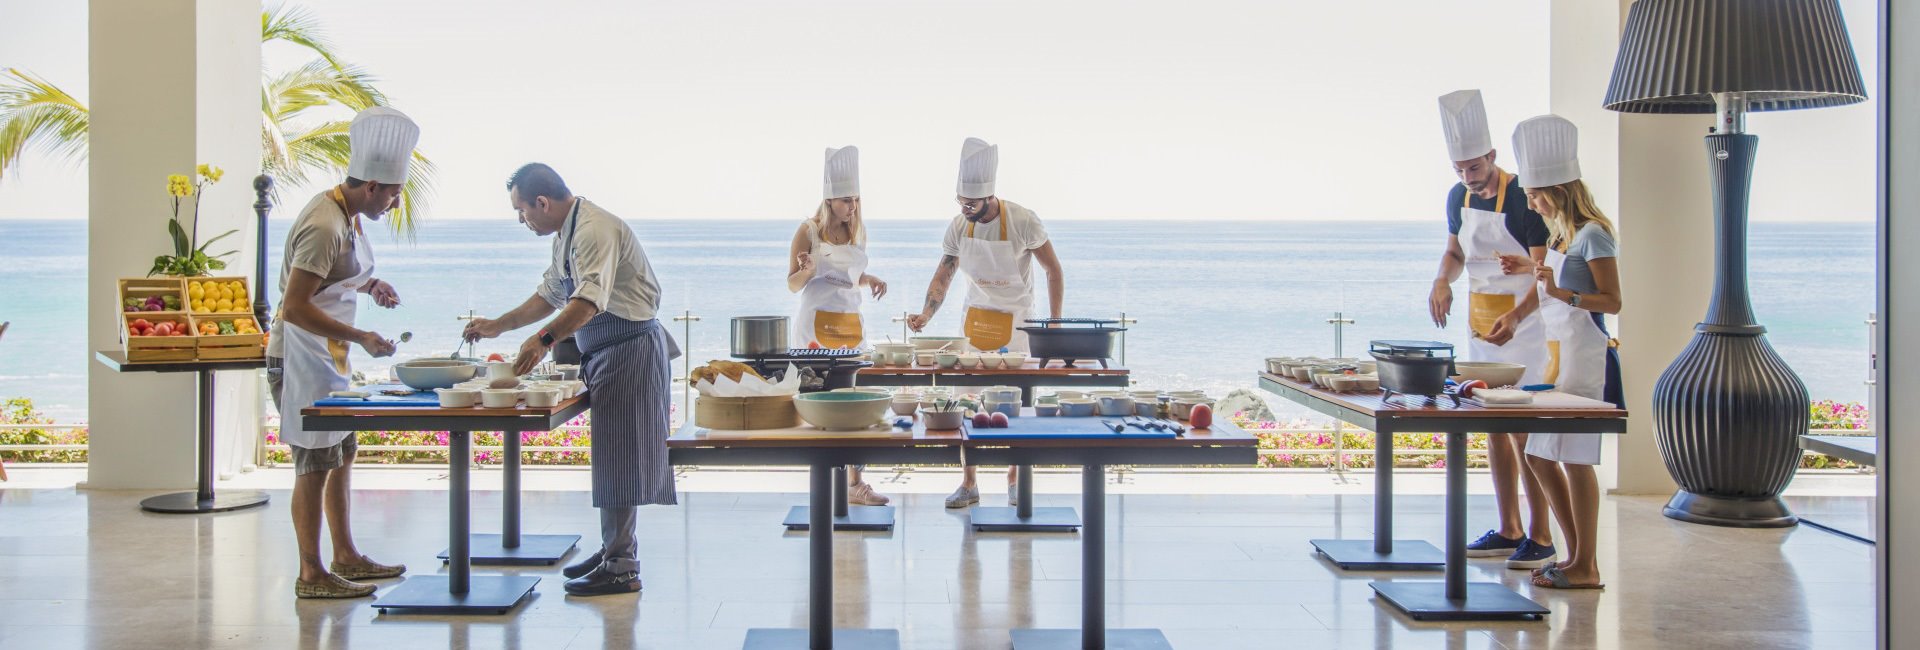 Picnic in Paradise Experience Package at Grand Velas Los Cabos, Mexico